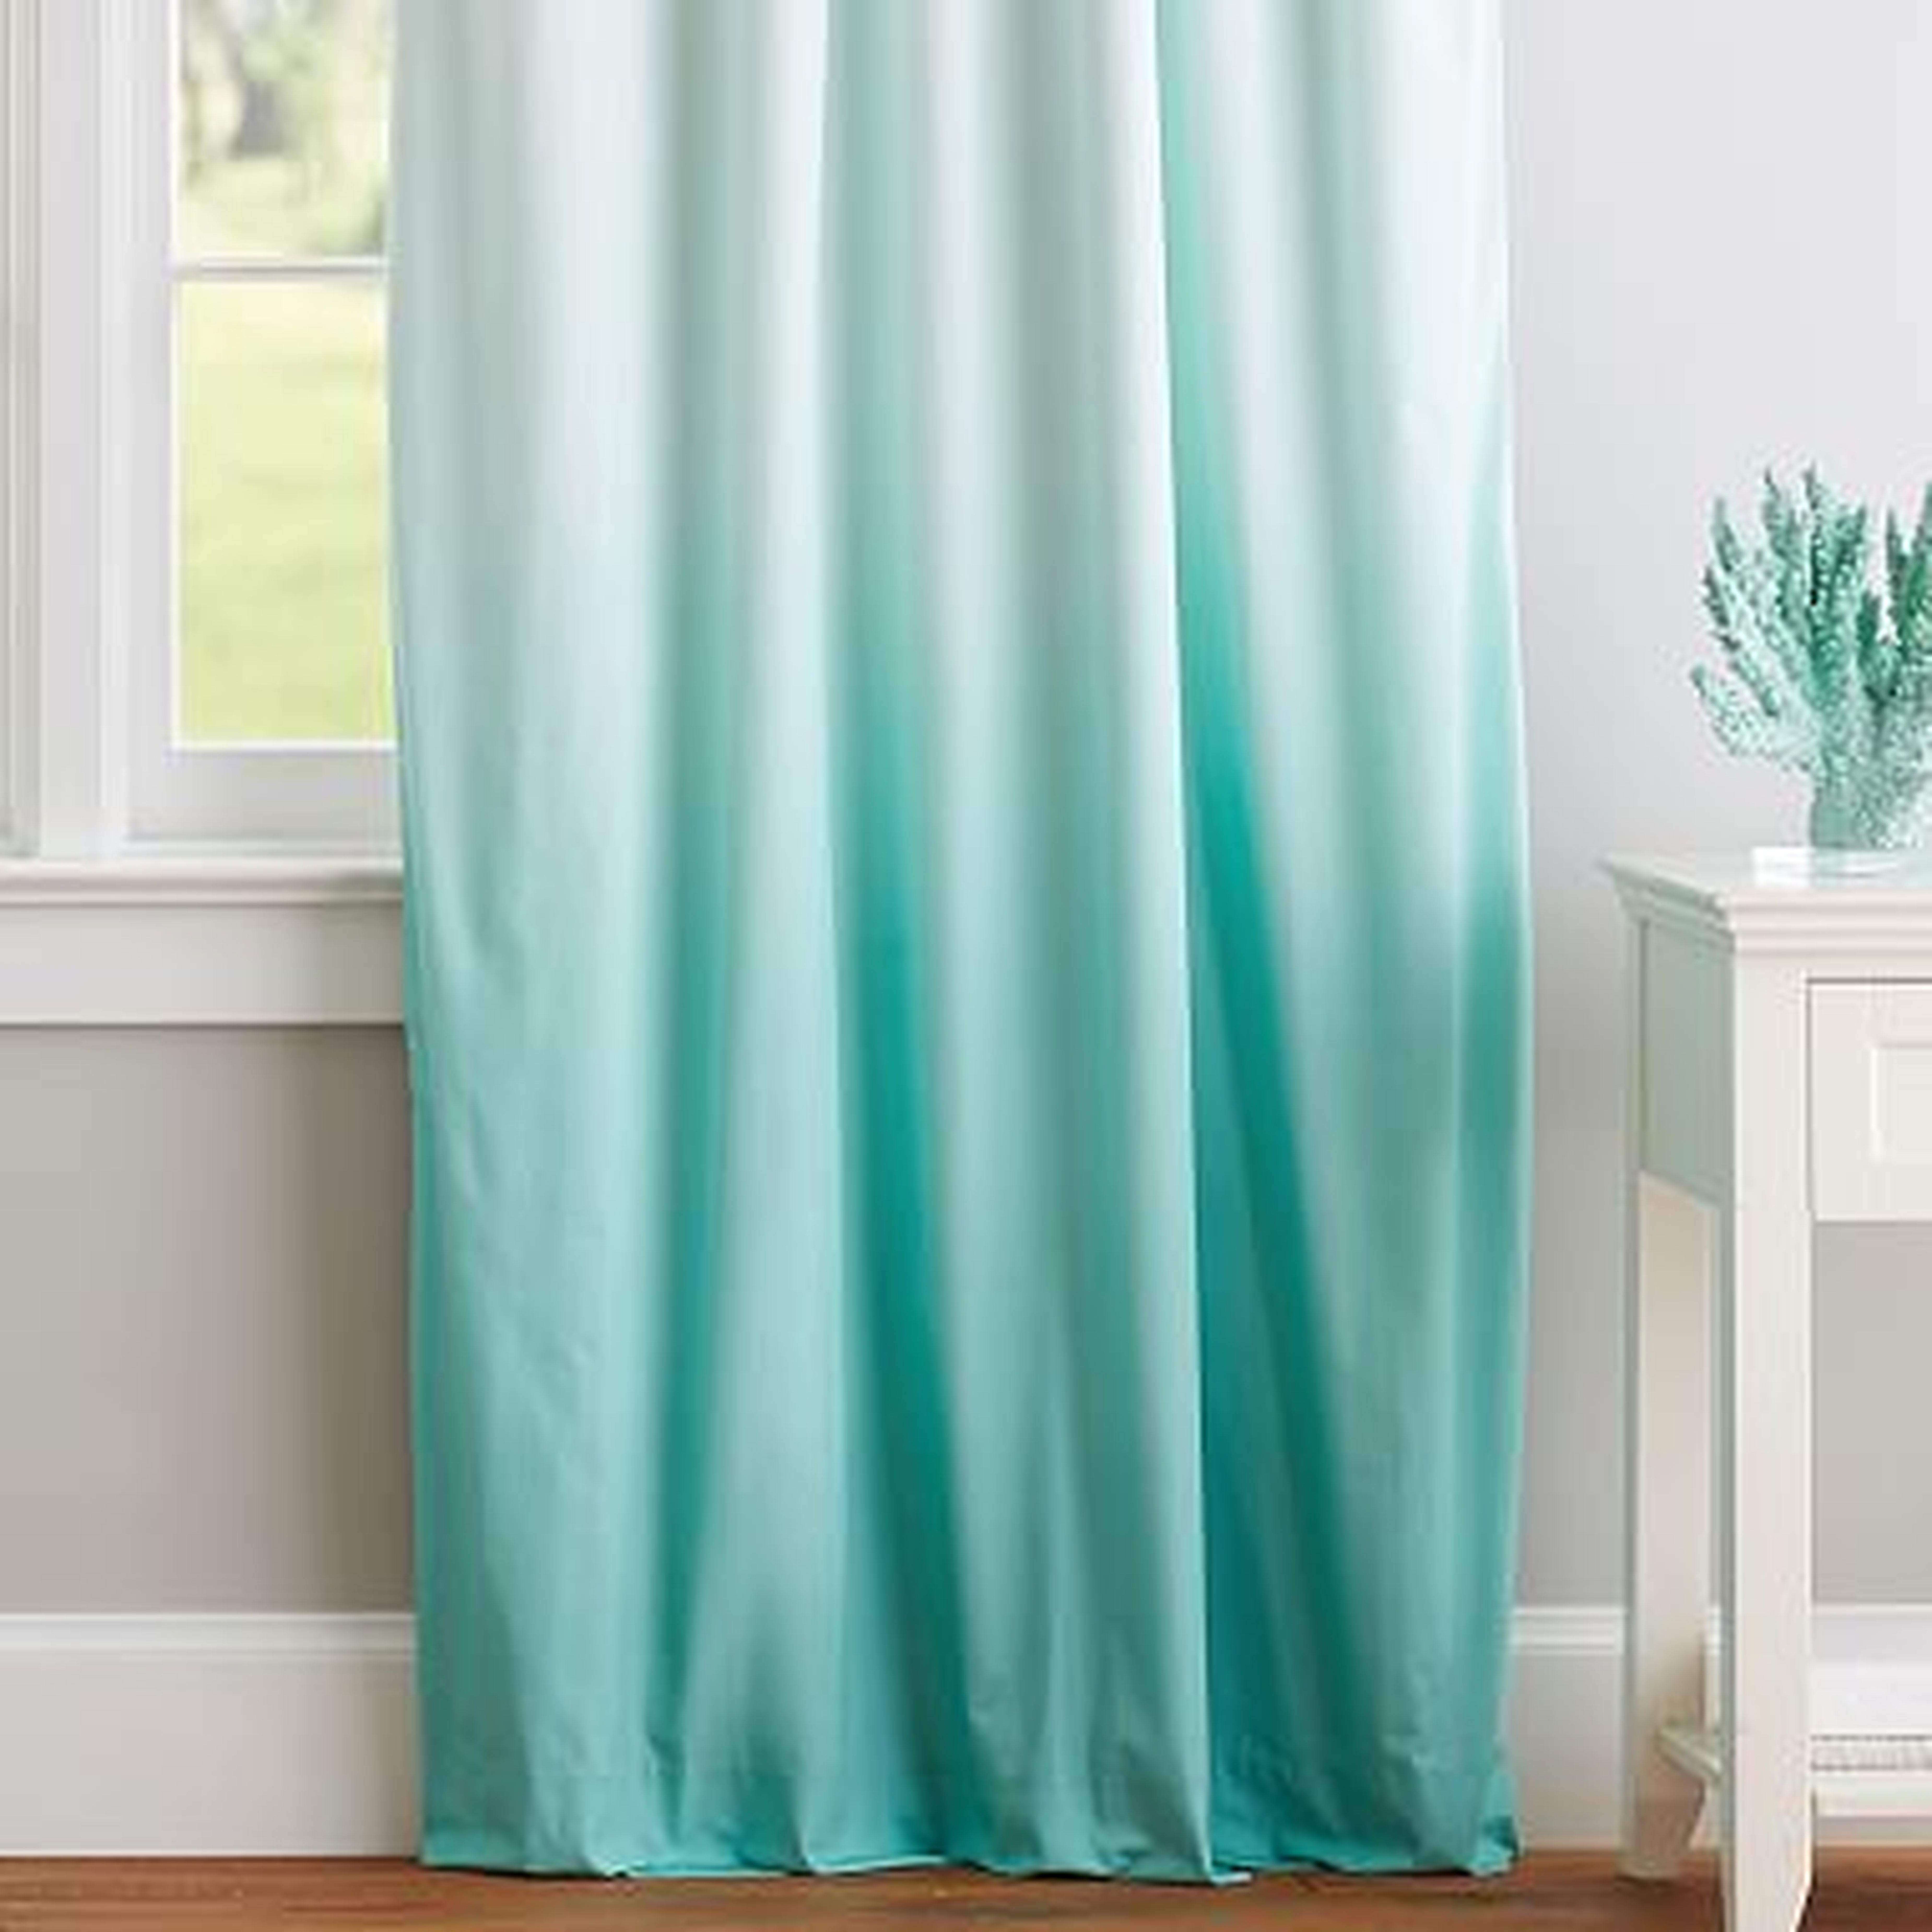 Ombre Blackout Curtain - Set of 2, 108", Turquoise - Pottery Barn Teen